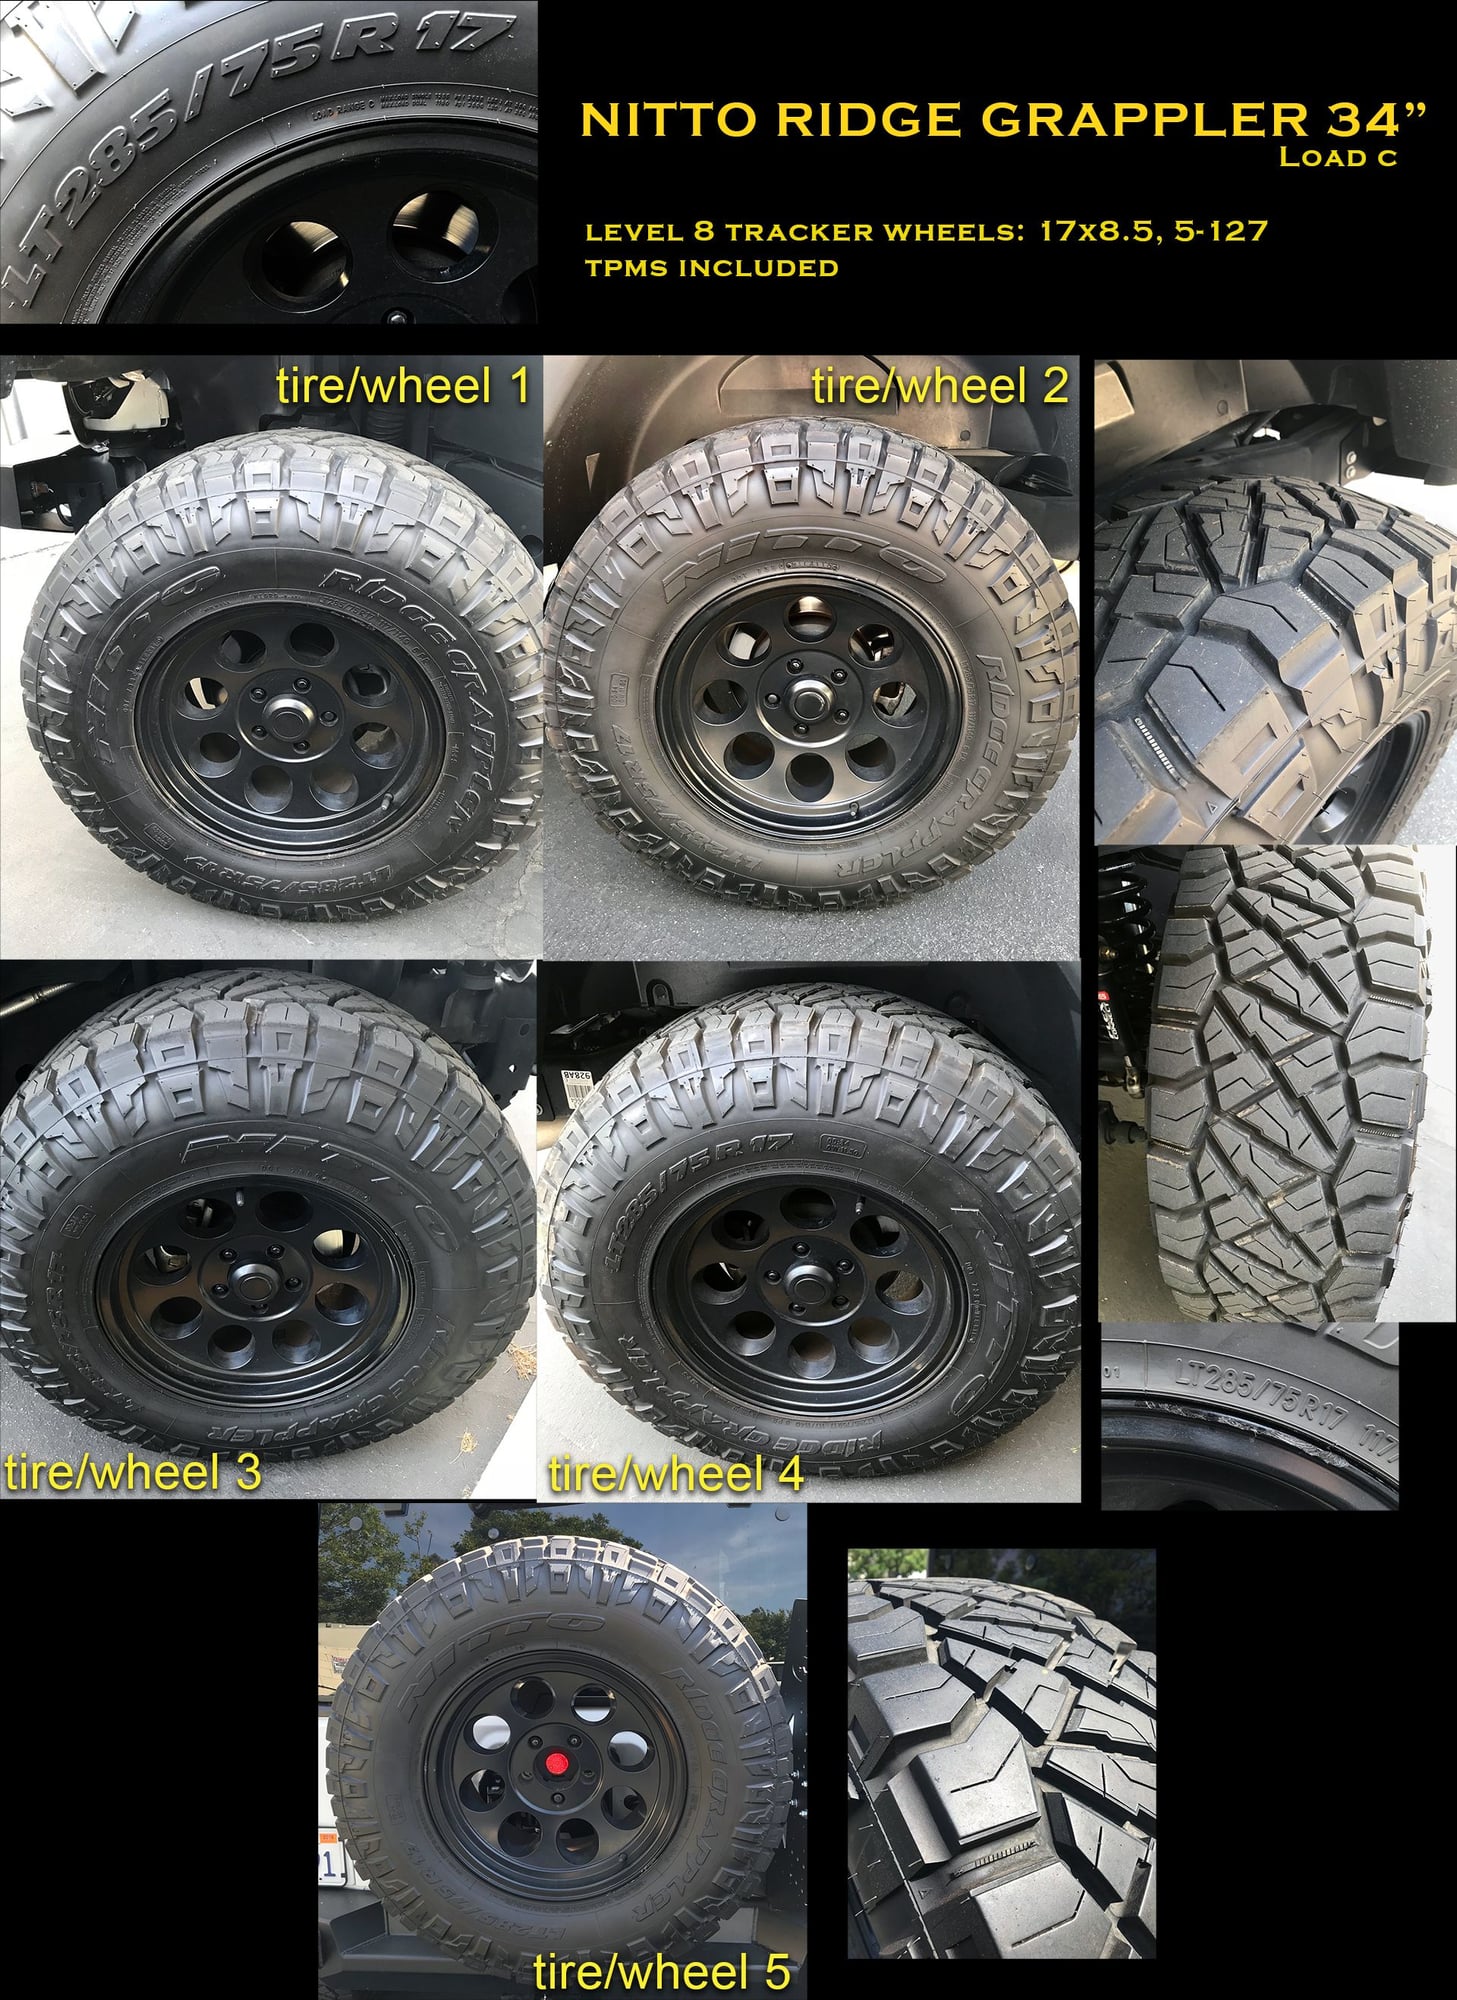 Wheels and Tires/Axles - For Sale: 5x Nitto Ridge Grappler 34 with wheels & tpms - Used - 2007 to 2018 Jeep Wrangler - Glendale, CA 91202, United States